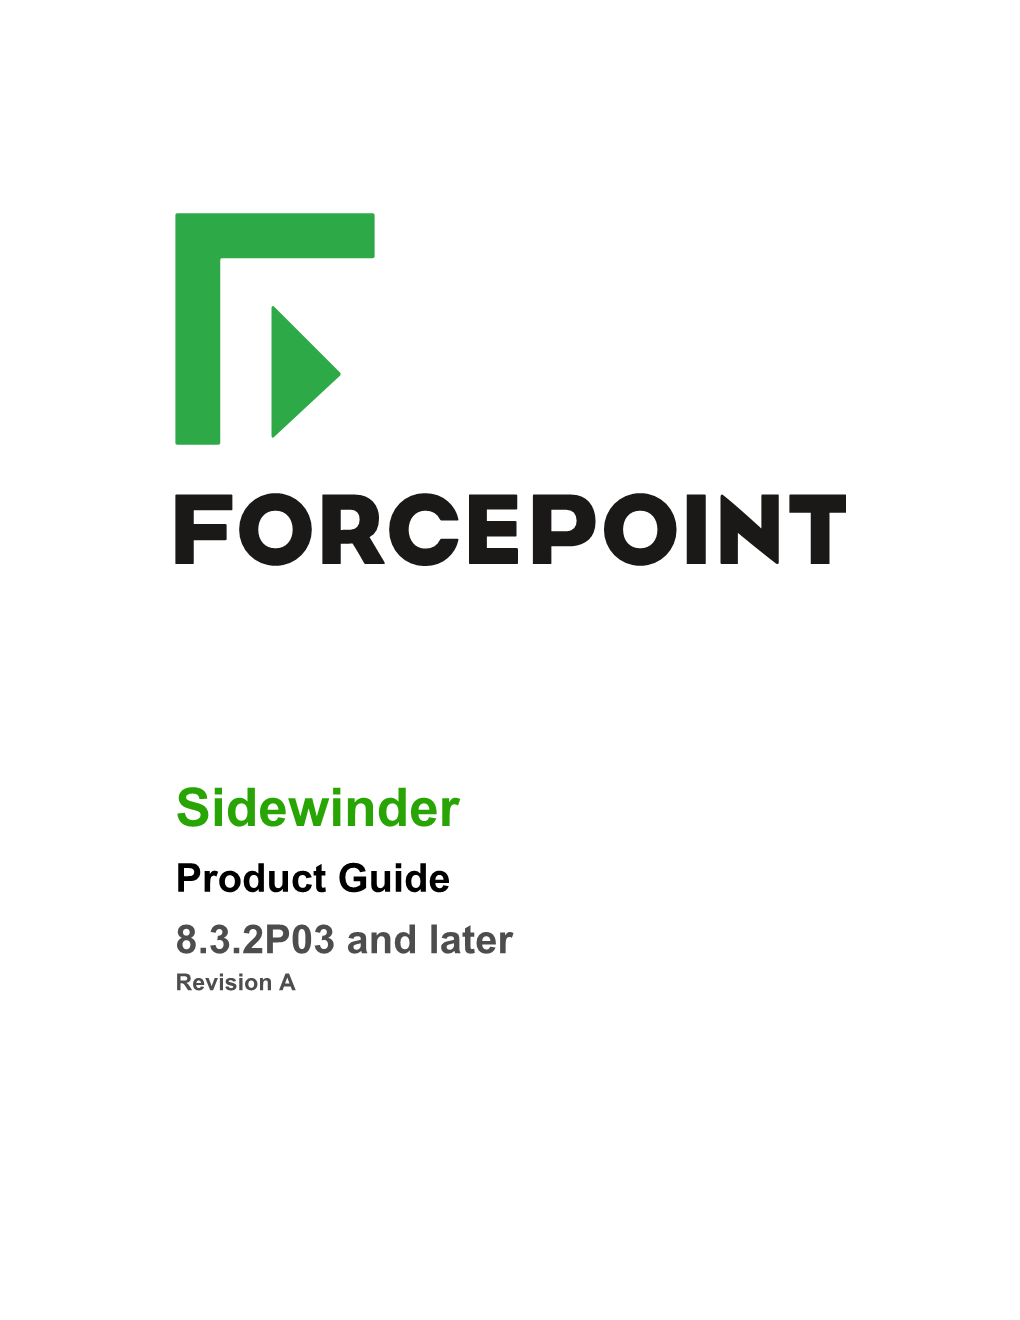 Forcepoint Sidewinder Product Guide